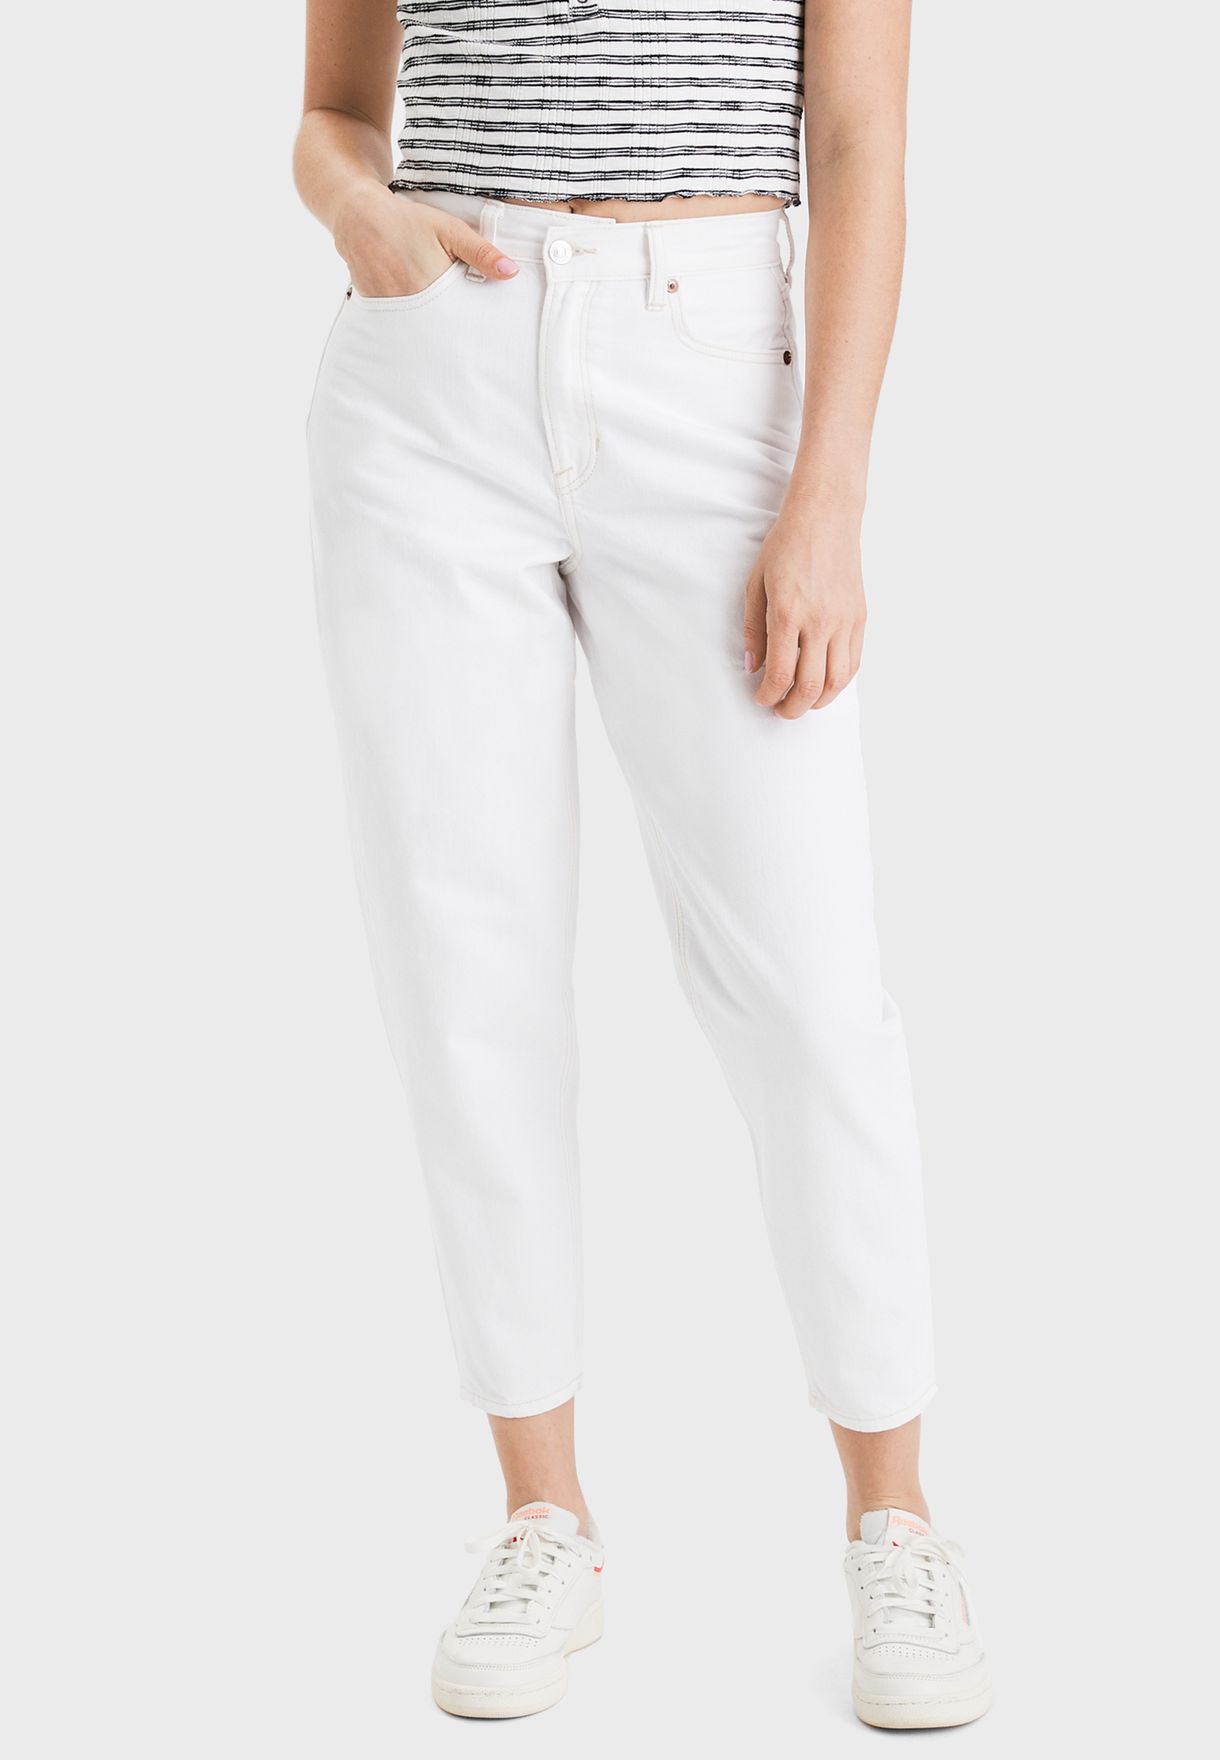 american eagle high waisted white jeans